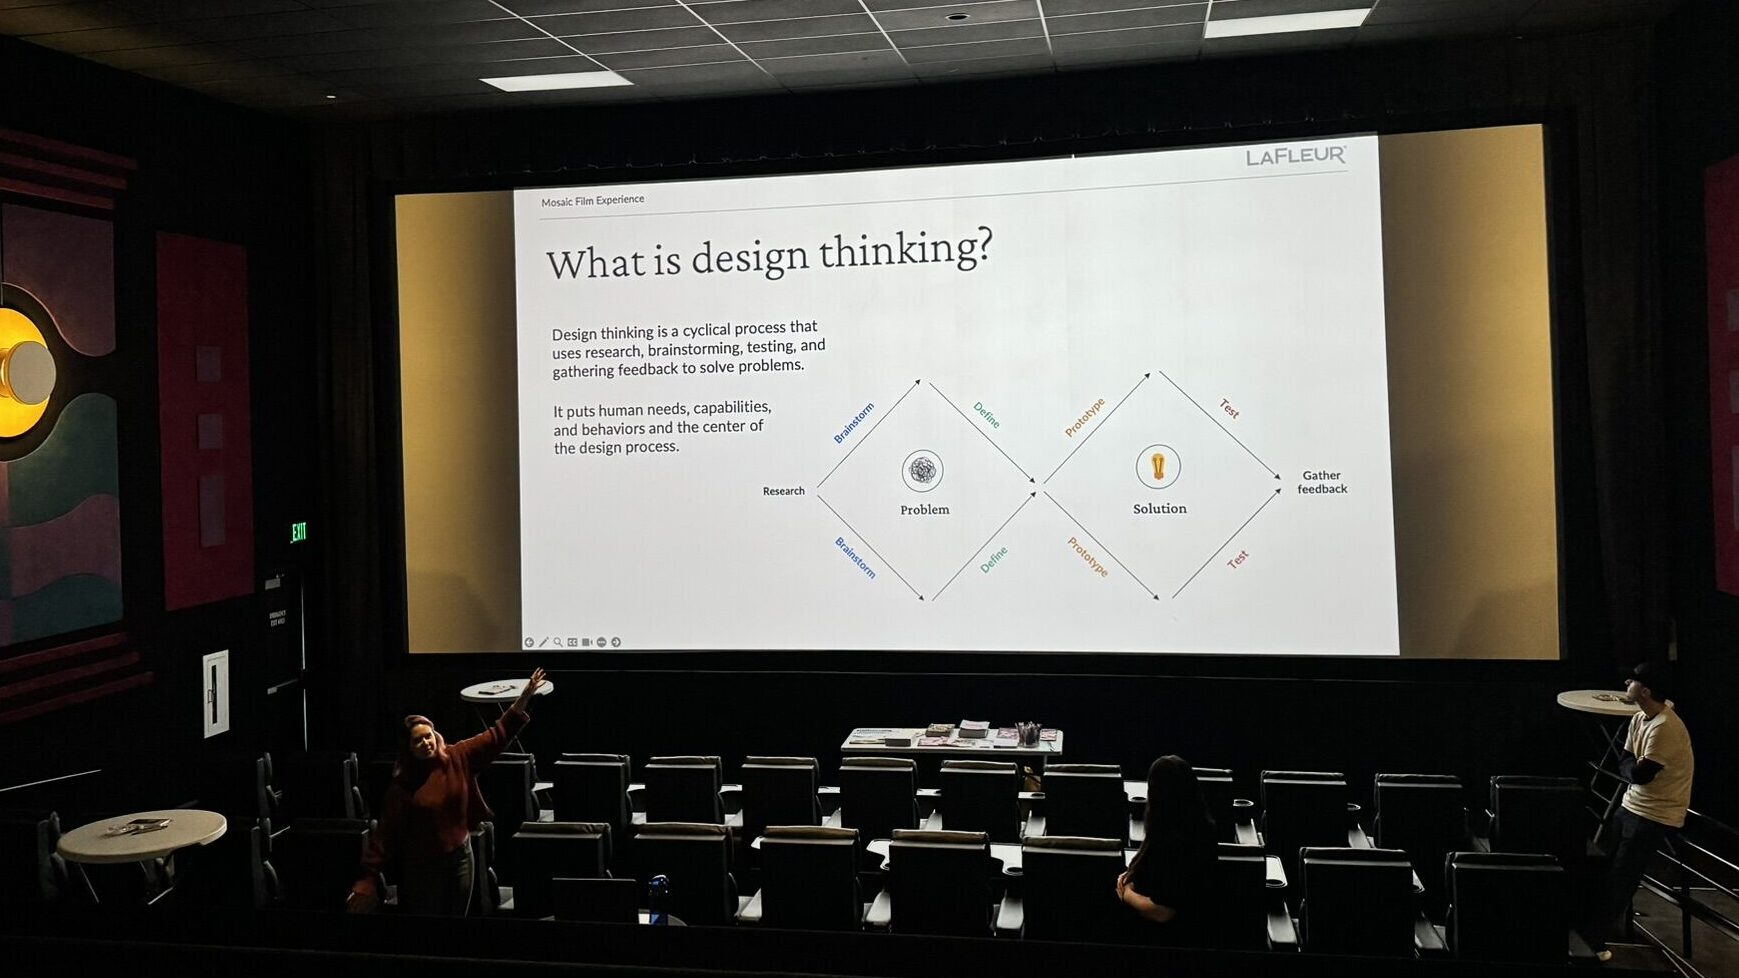 Bringing design thinking education to local students